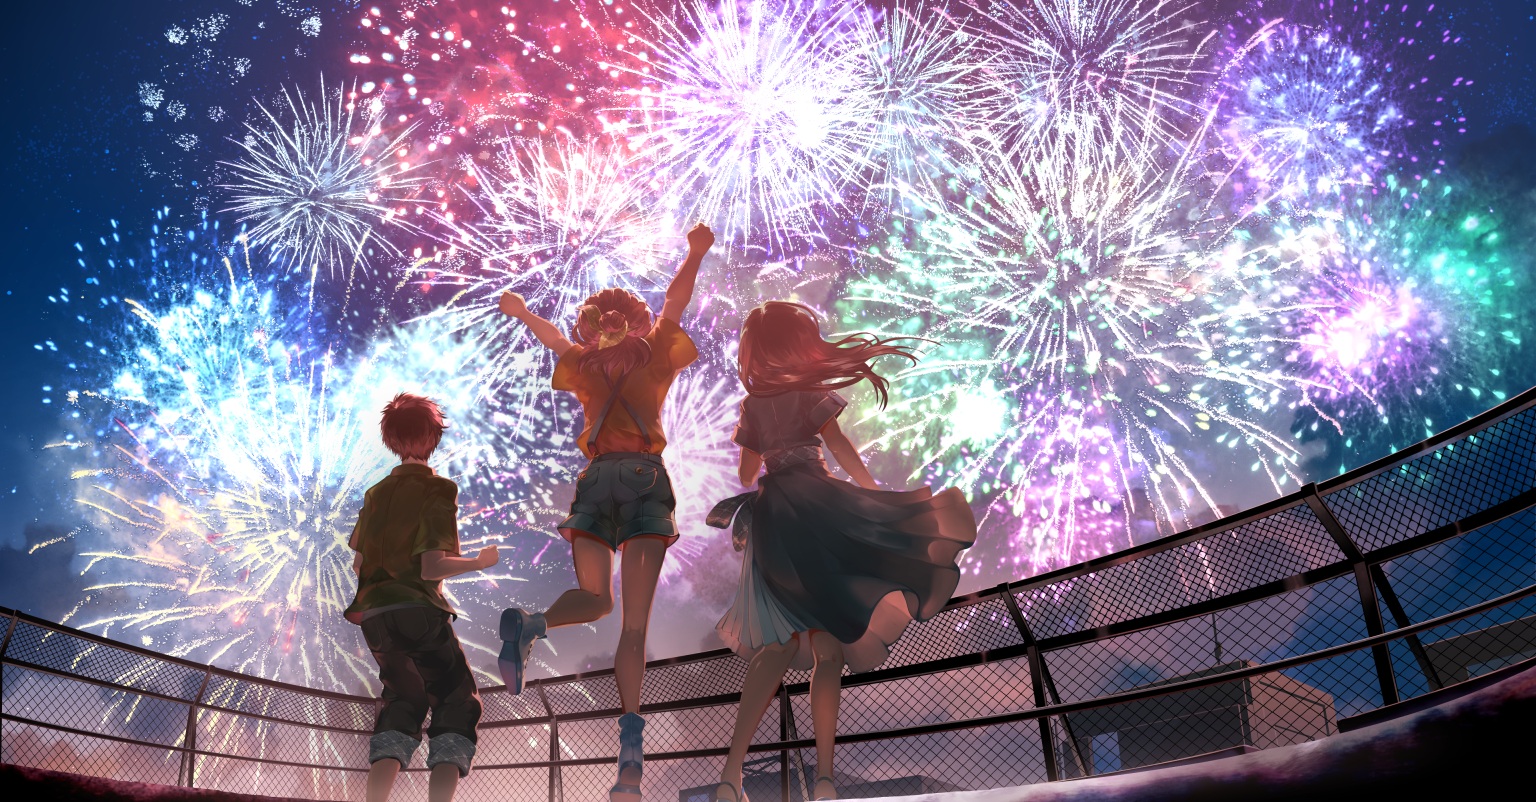 Anime 1536x802 anime anime girls fireworks sky fence jumping arms up hair blowing in the wind night anime boys